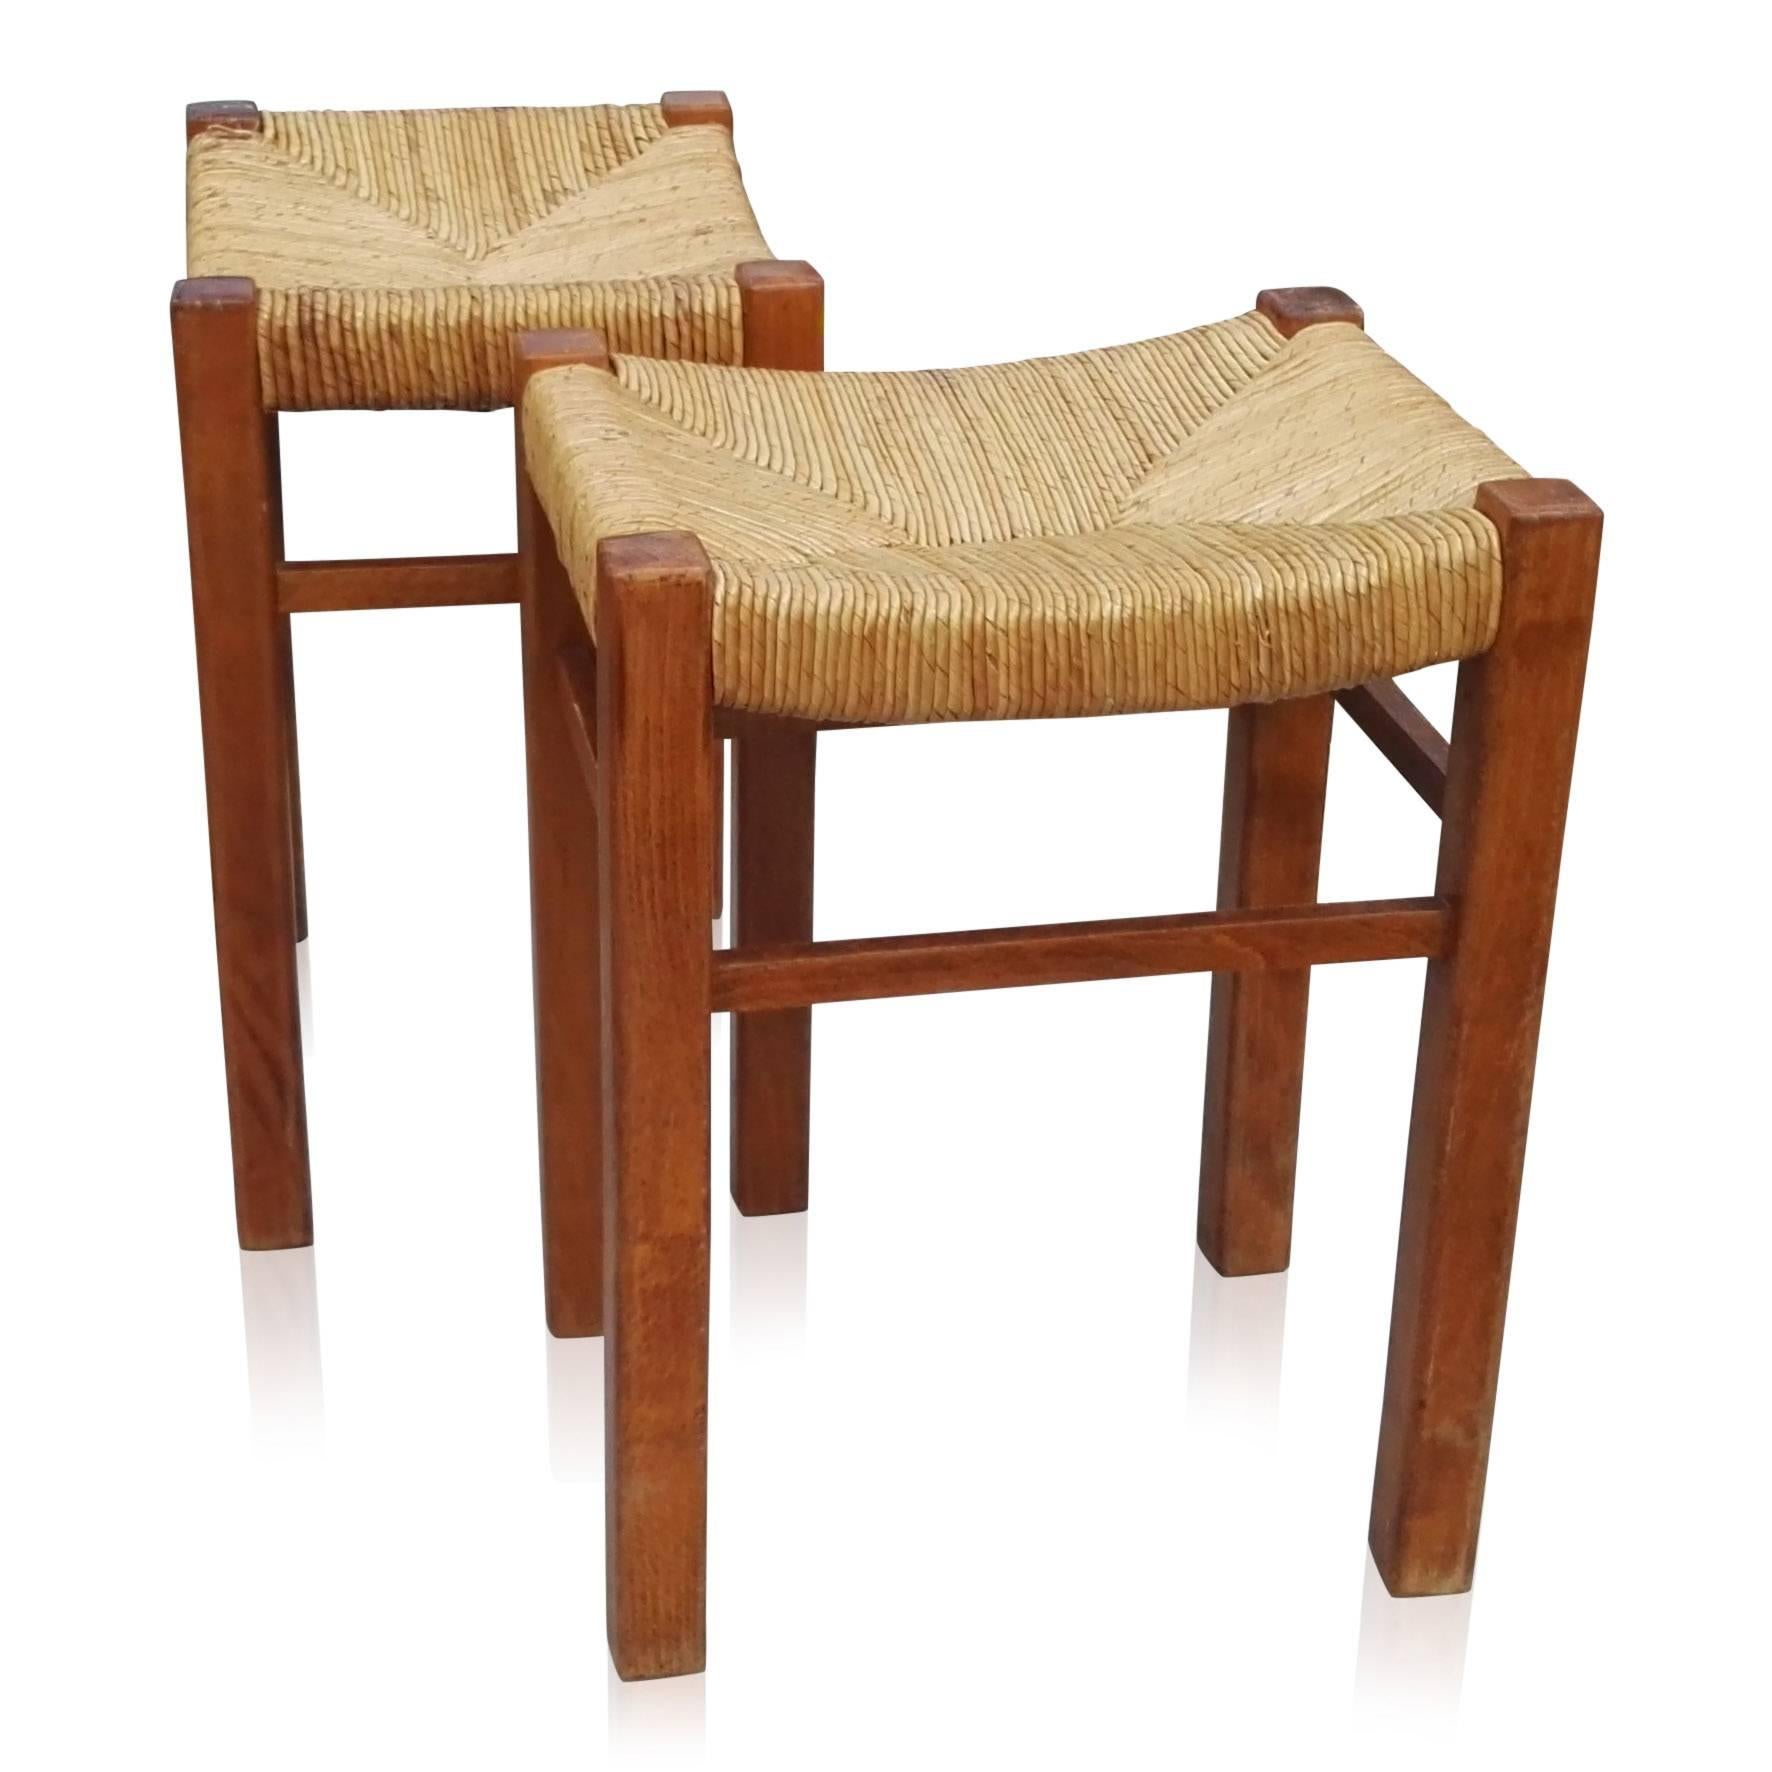 Beechwood and rush stools by Charlotte Perriand's student Gautier-Delaye.
Wear consistent with age.
Good vintage condition.
Editions week end.